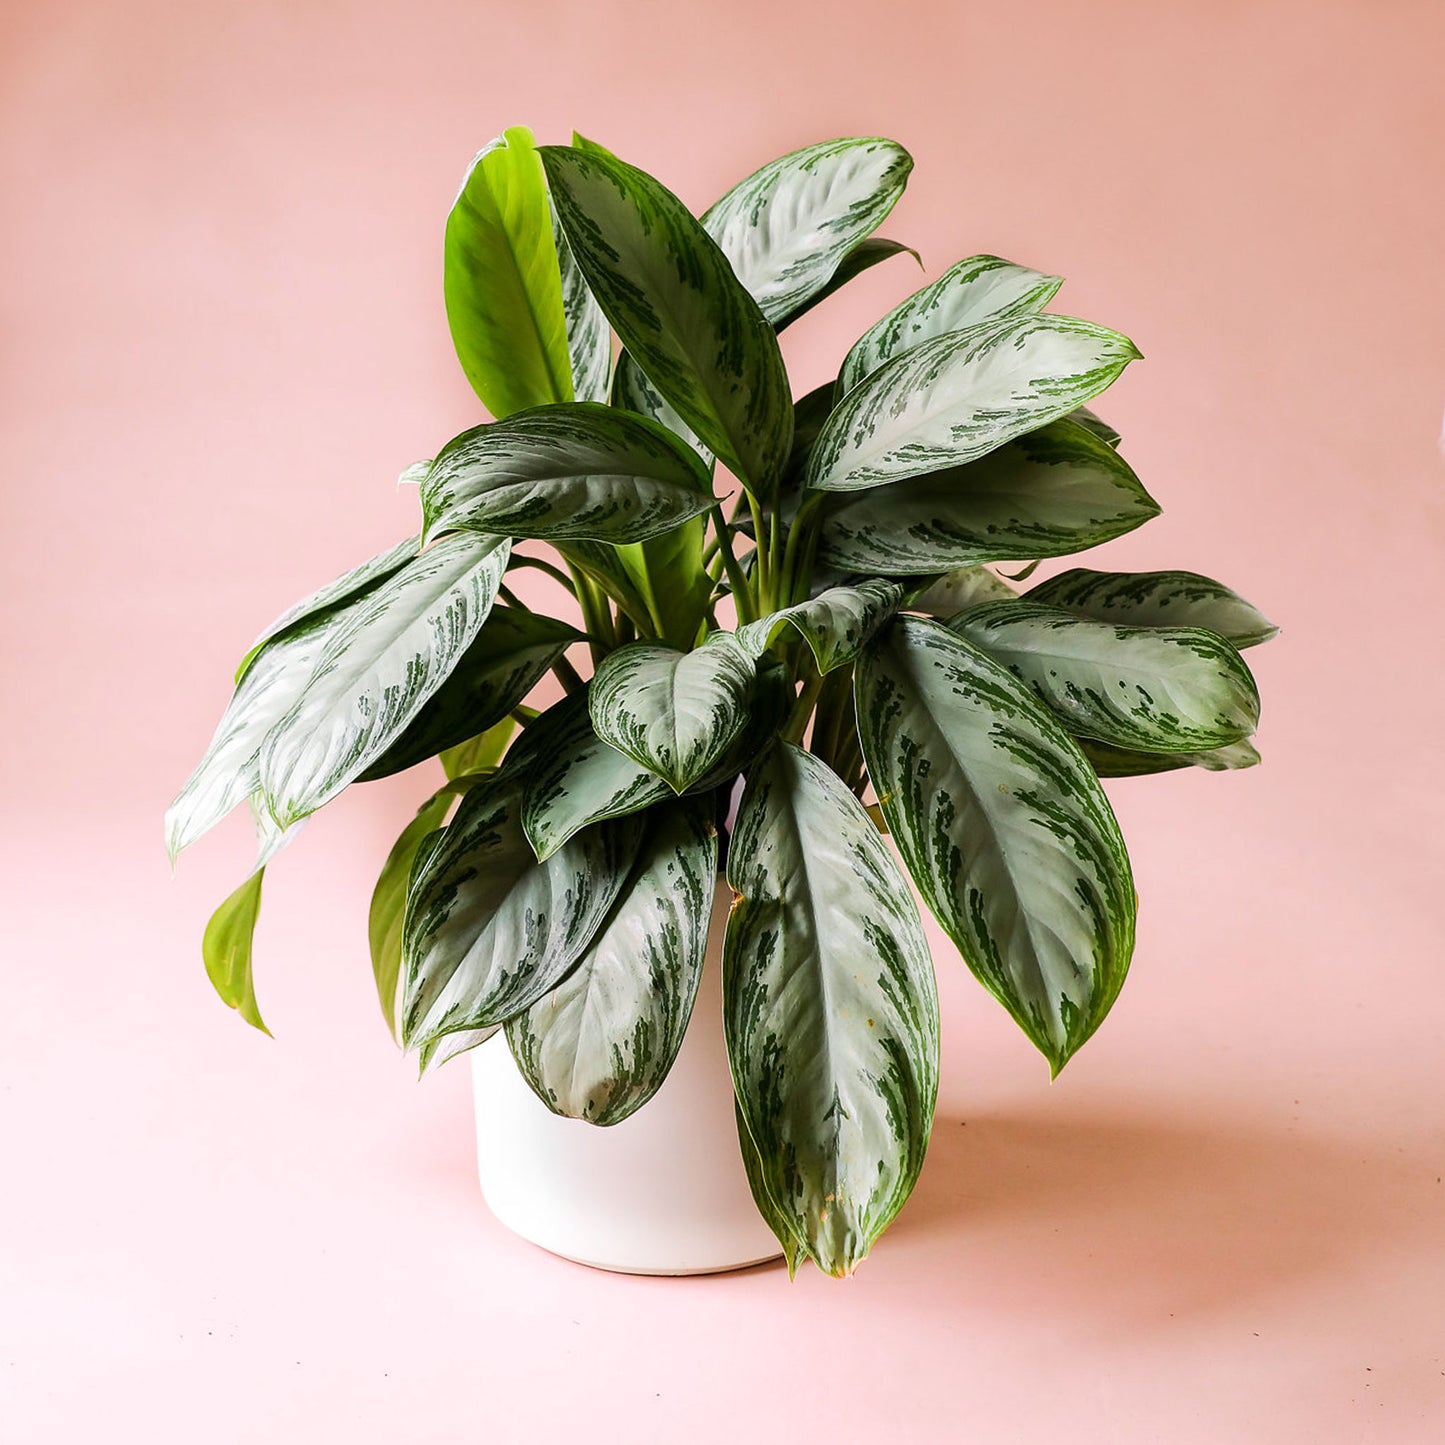 Chinese evergreen silver bay in a white pot